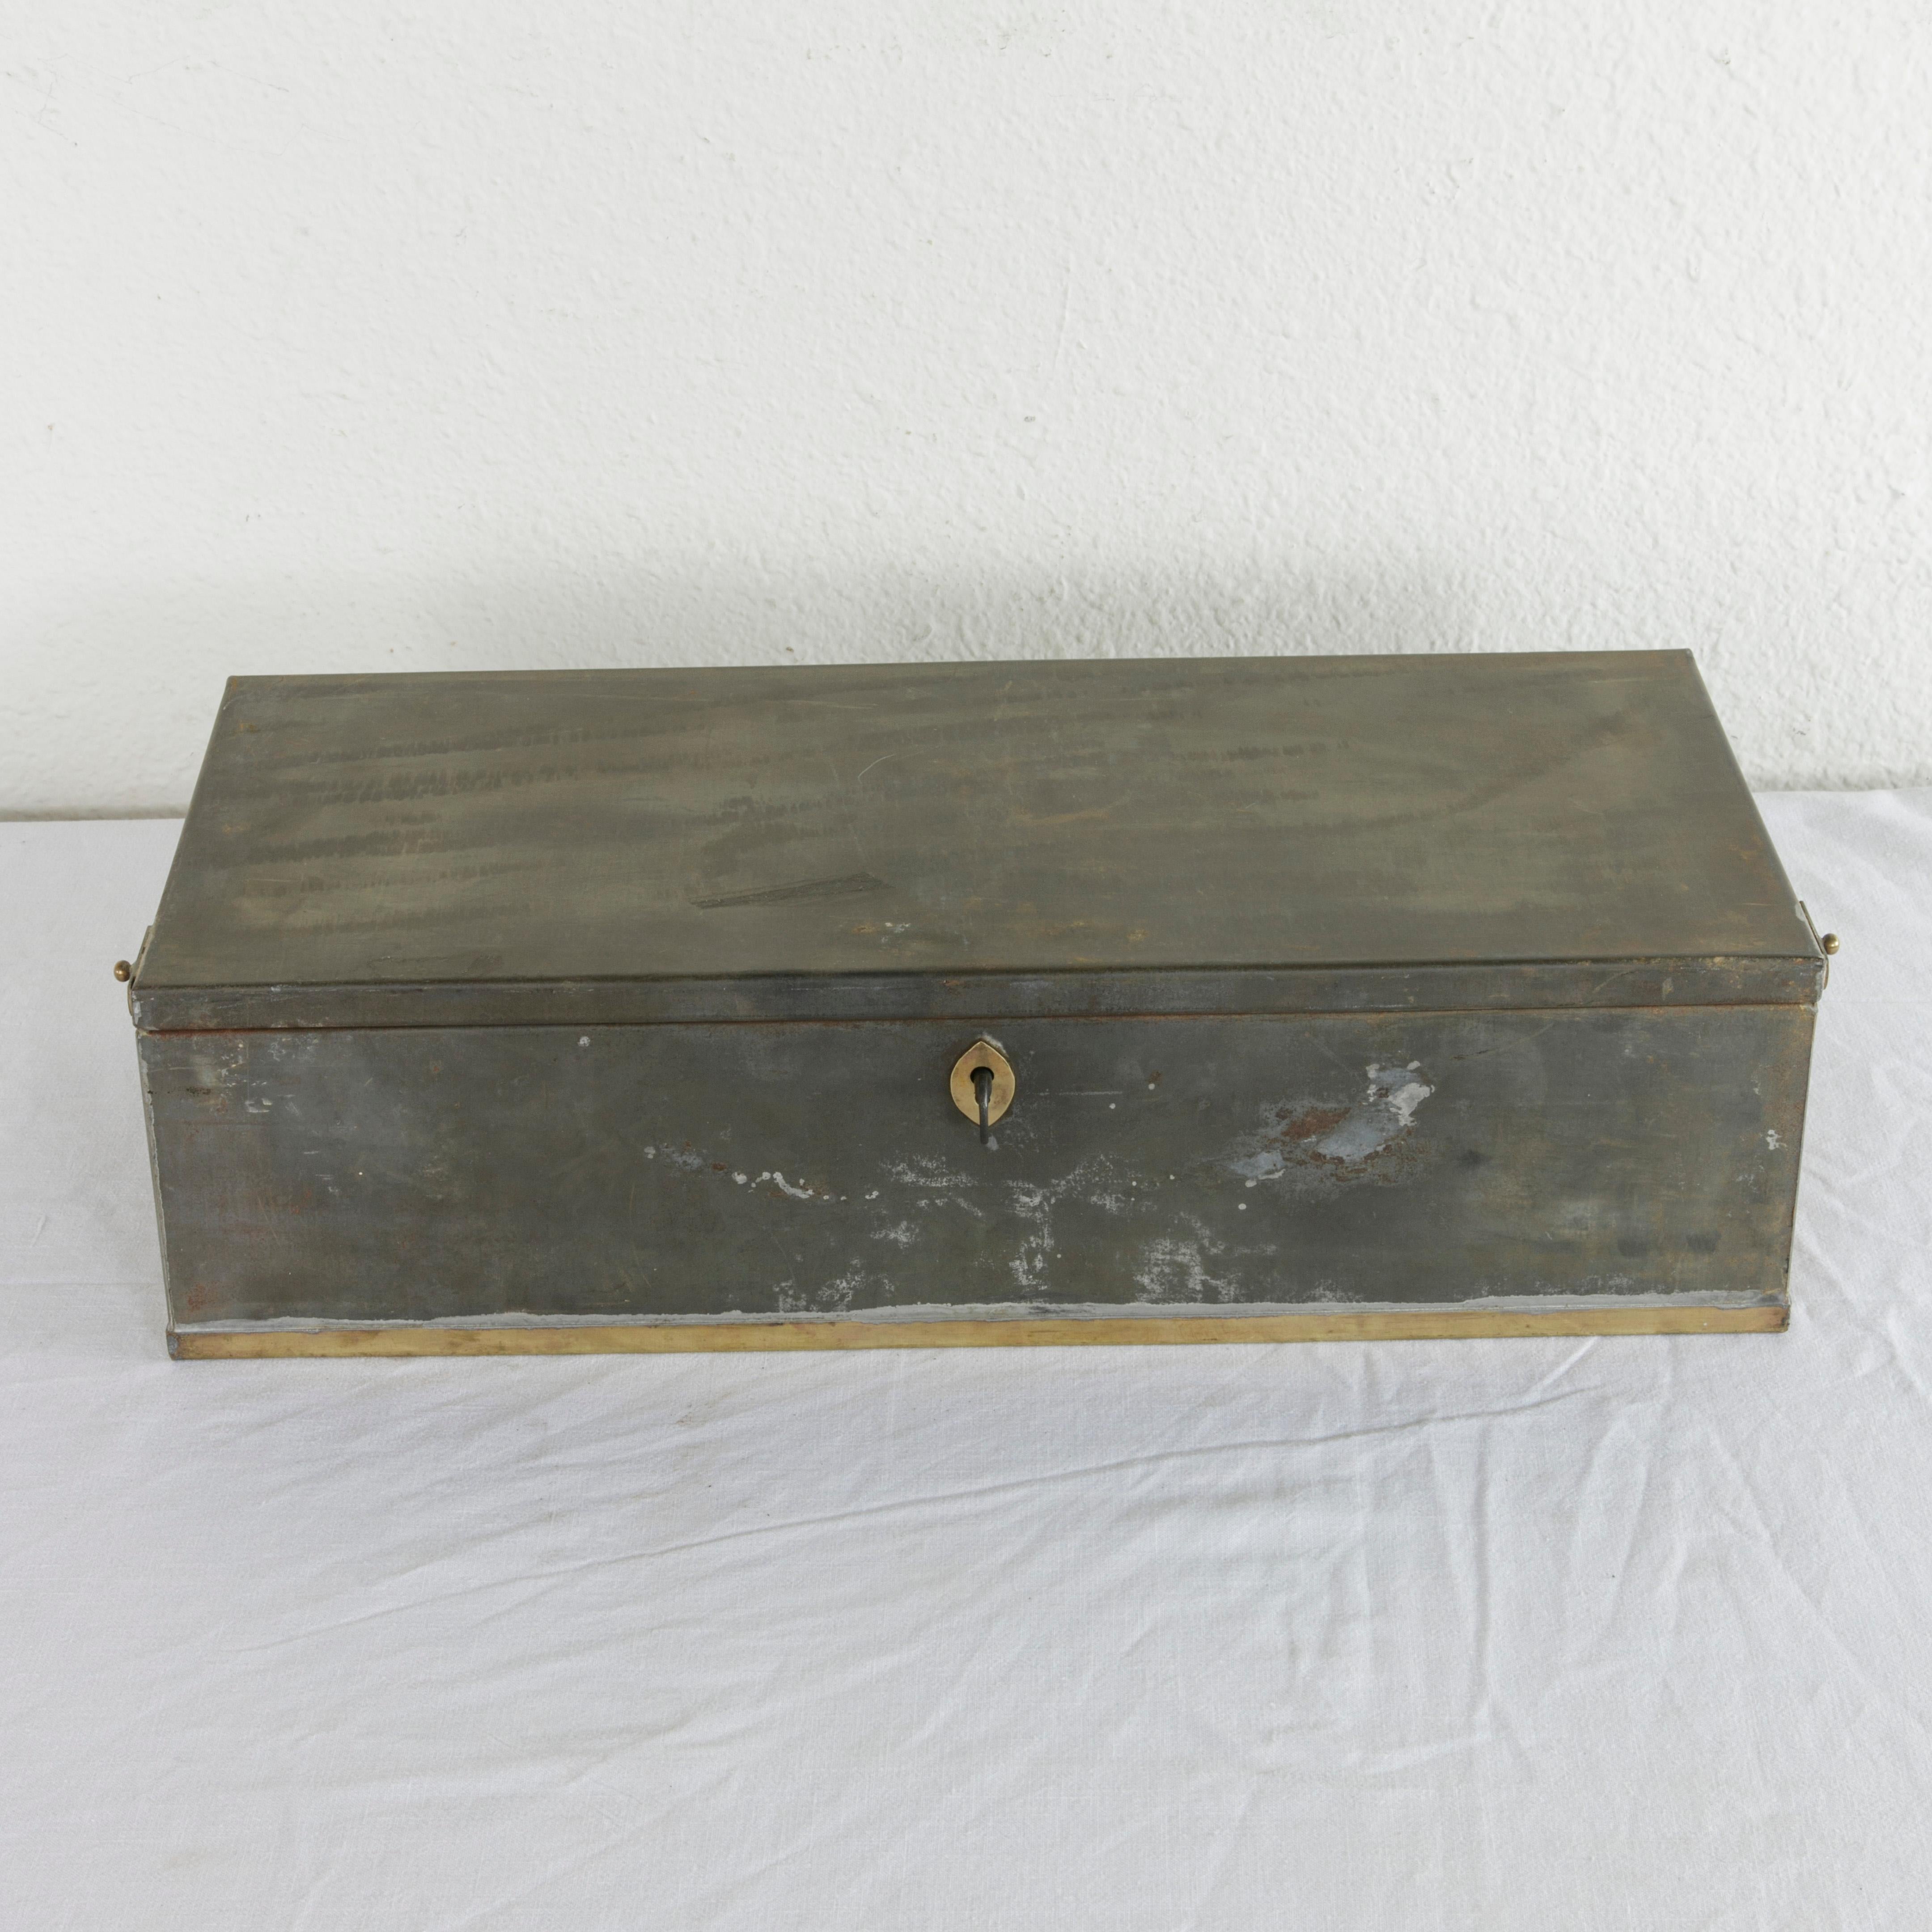 This early 20th century steel lock box or safety deposit box from the Banco Central of Barcelona in Spain features its original brass handles, trim, and key entry. The hand-painted number 317 is on one side, and the box includes its two original